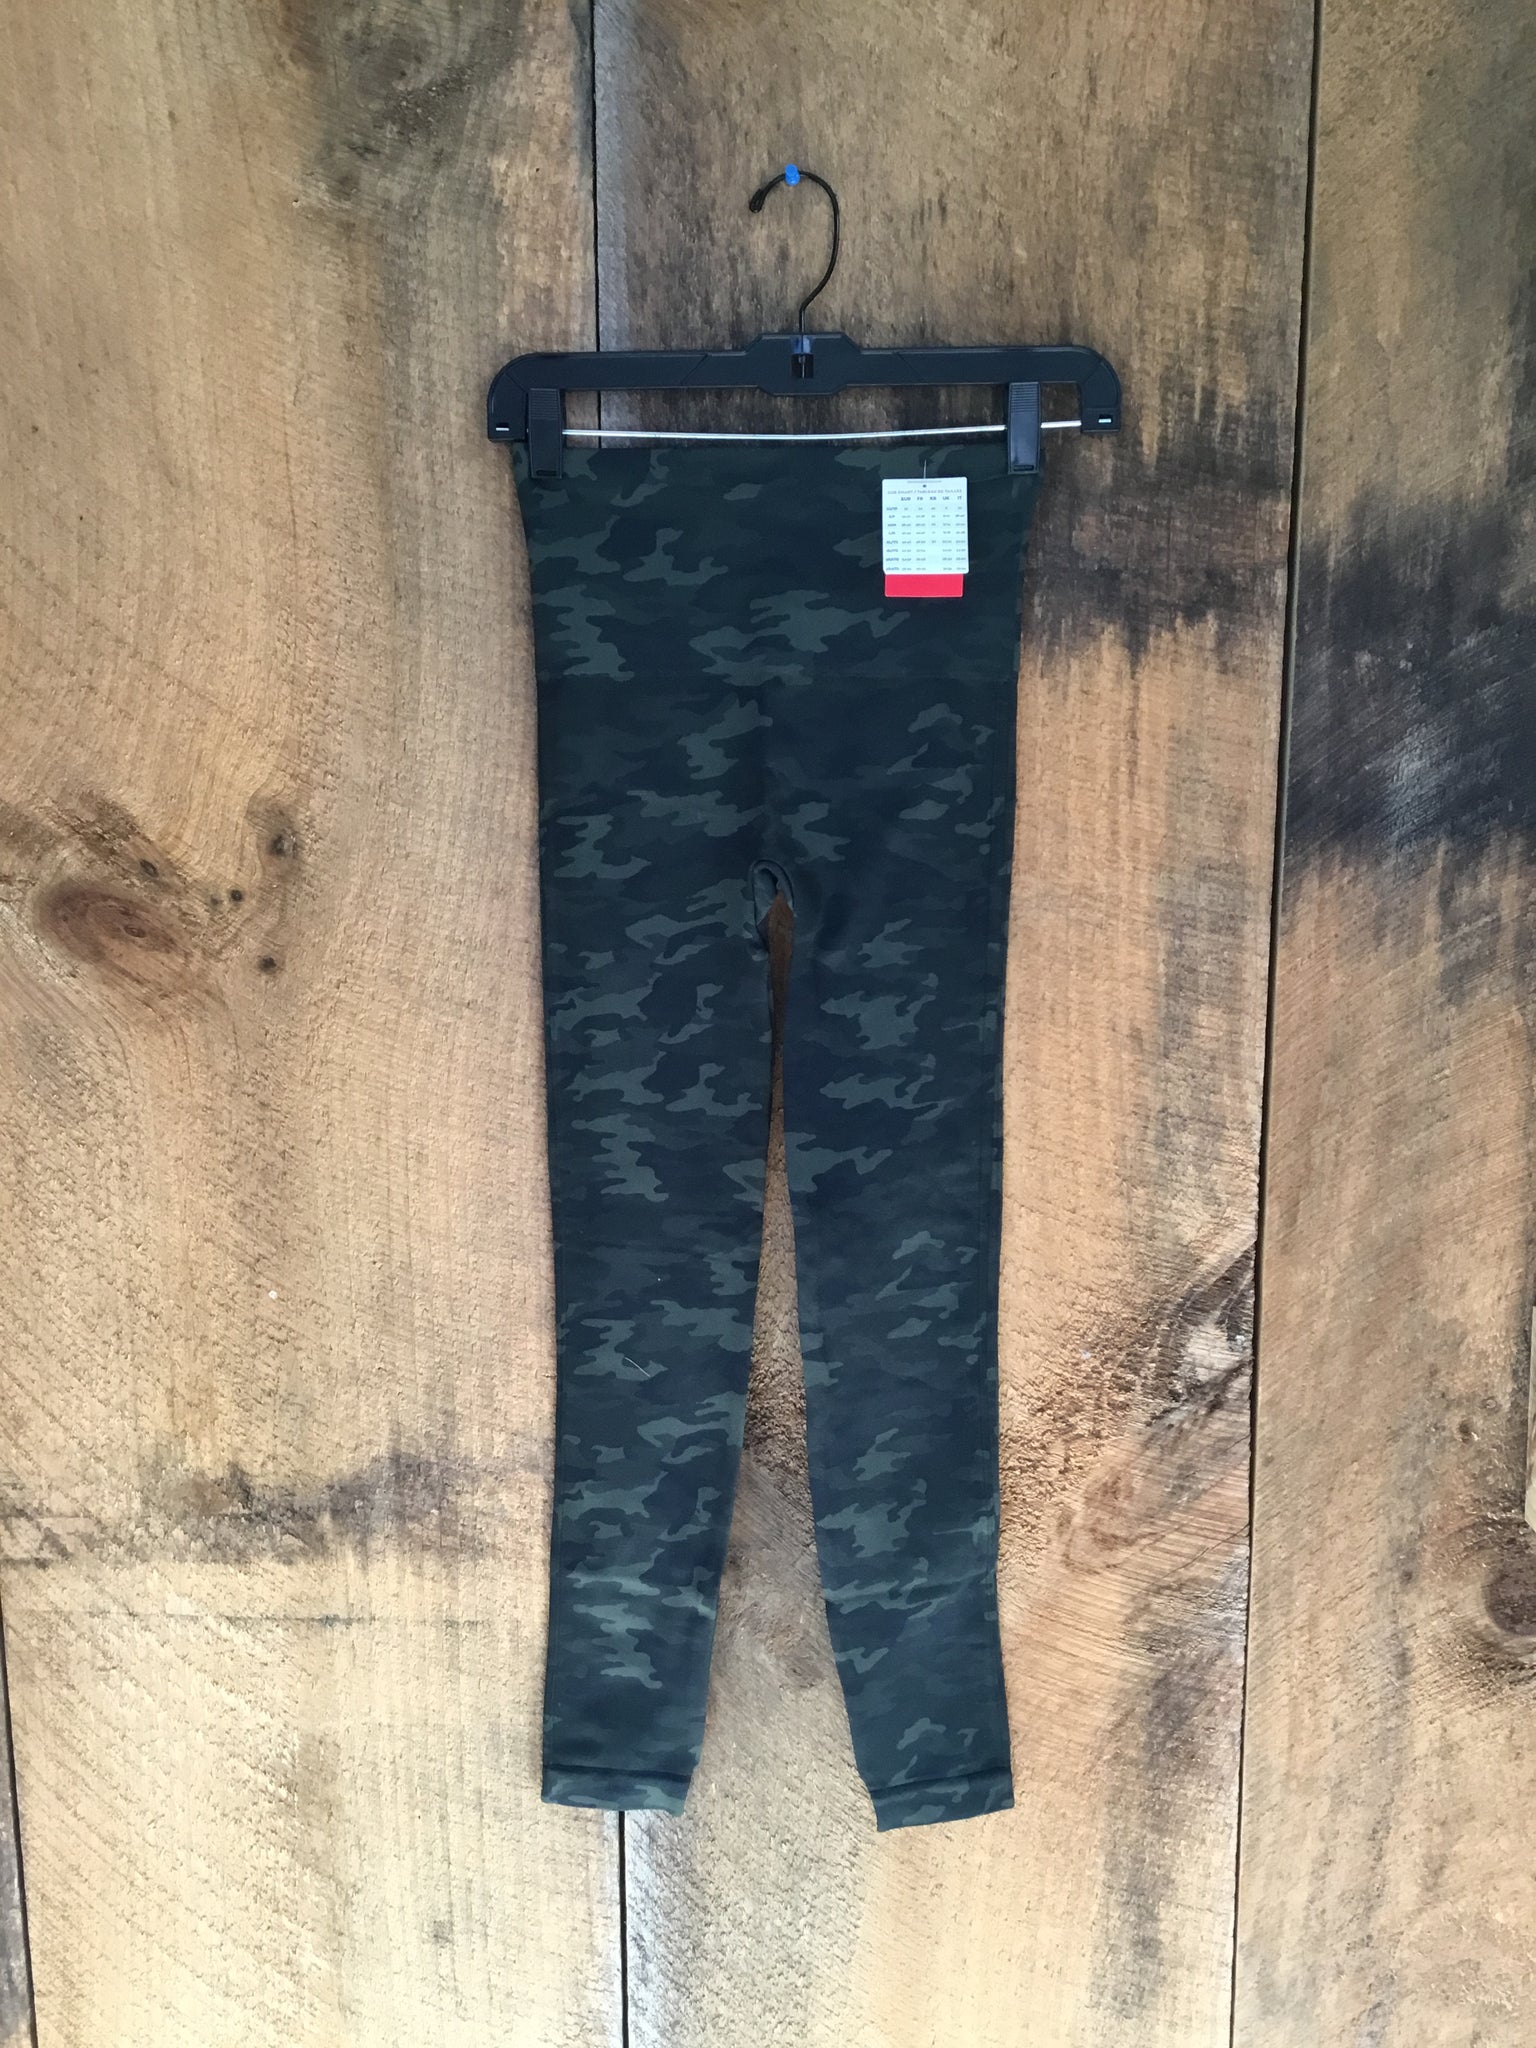 NEW! SPANX Look At Me Now Seamless Leggings, Black Camo, Size